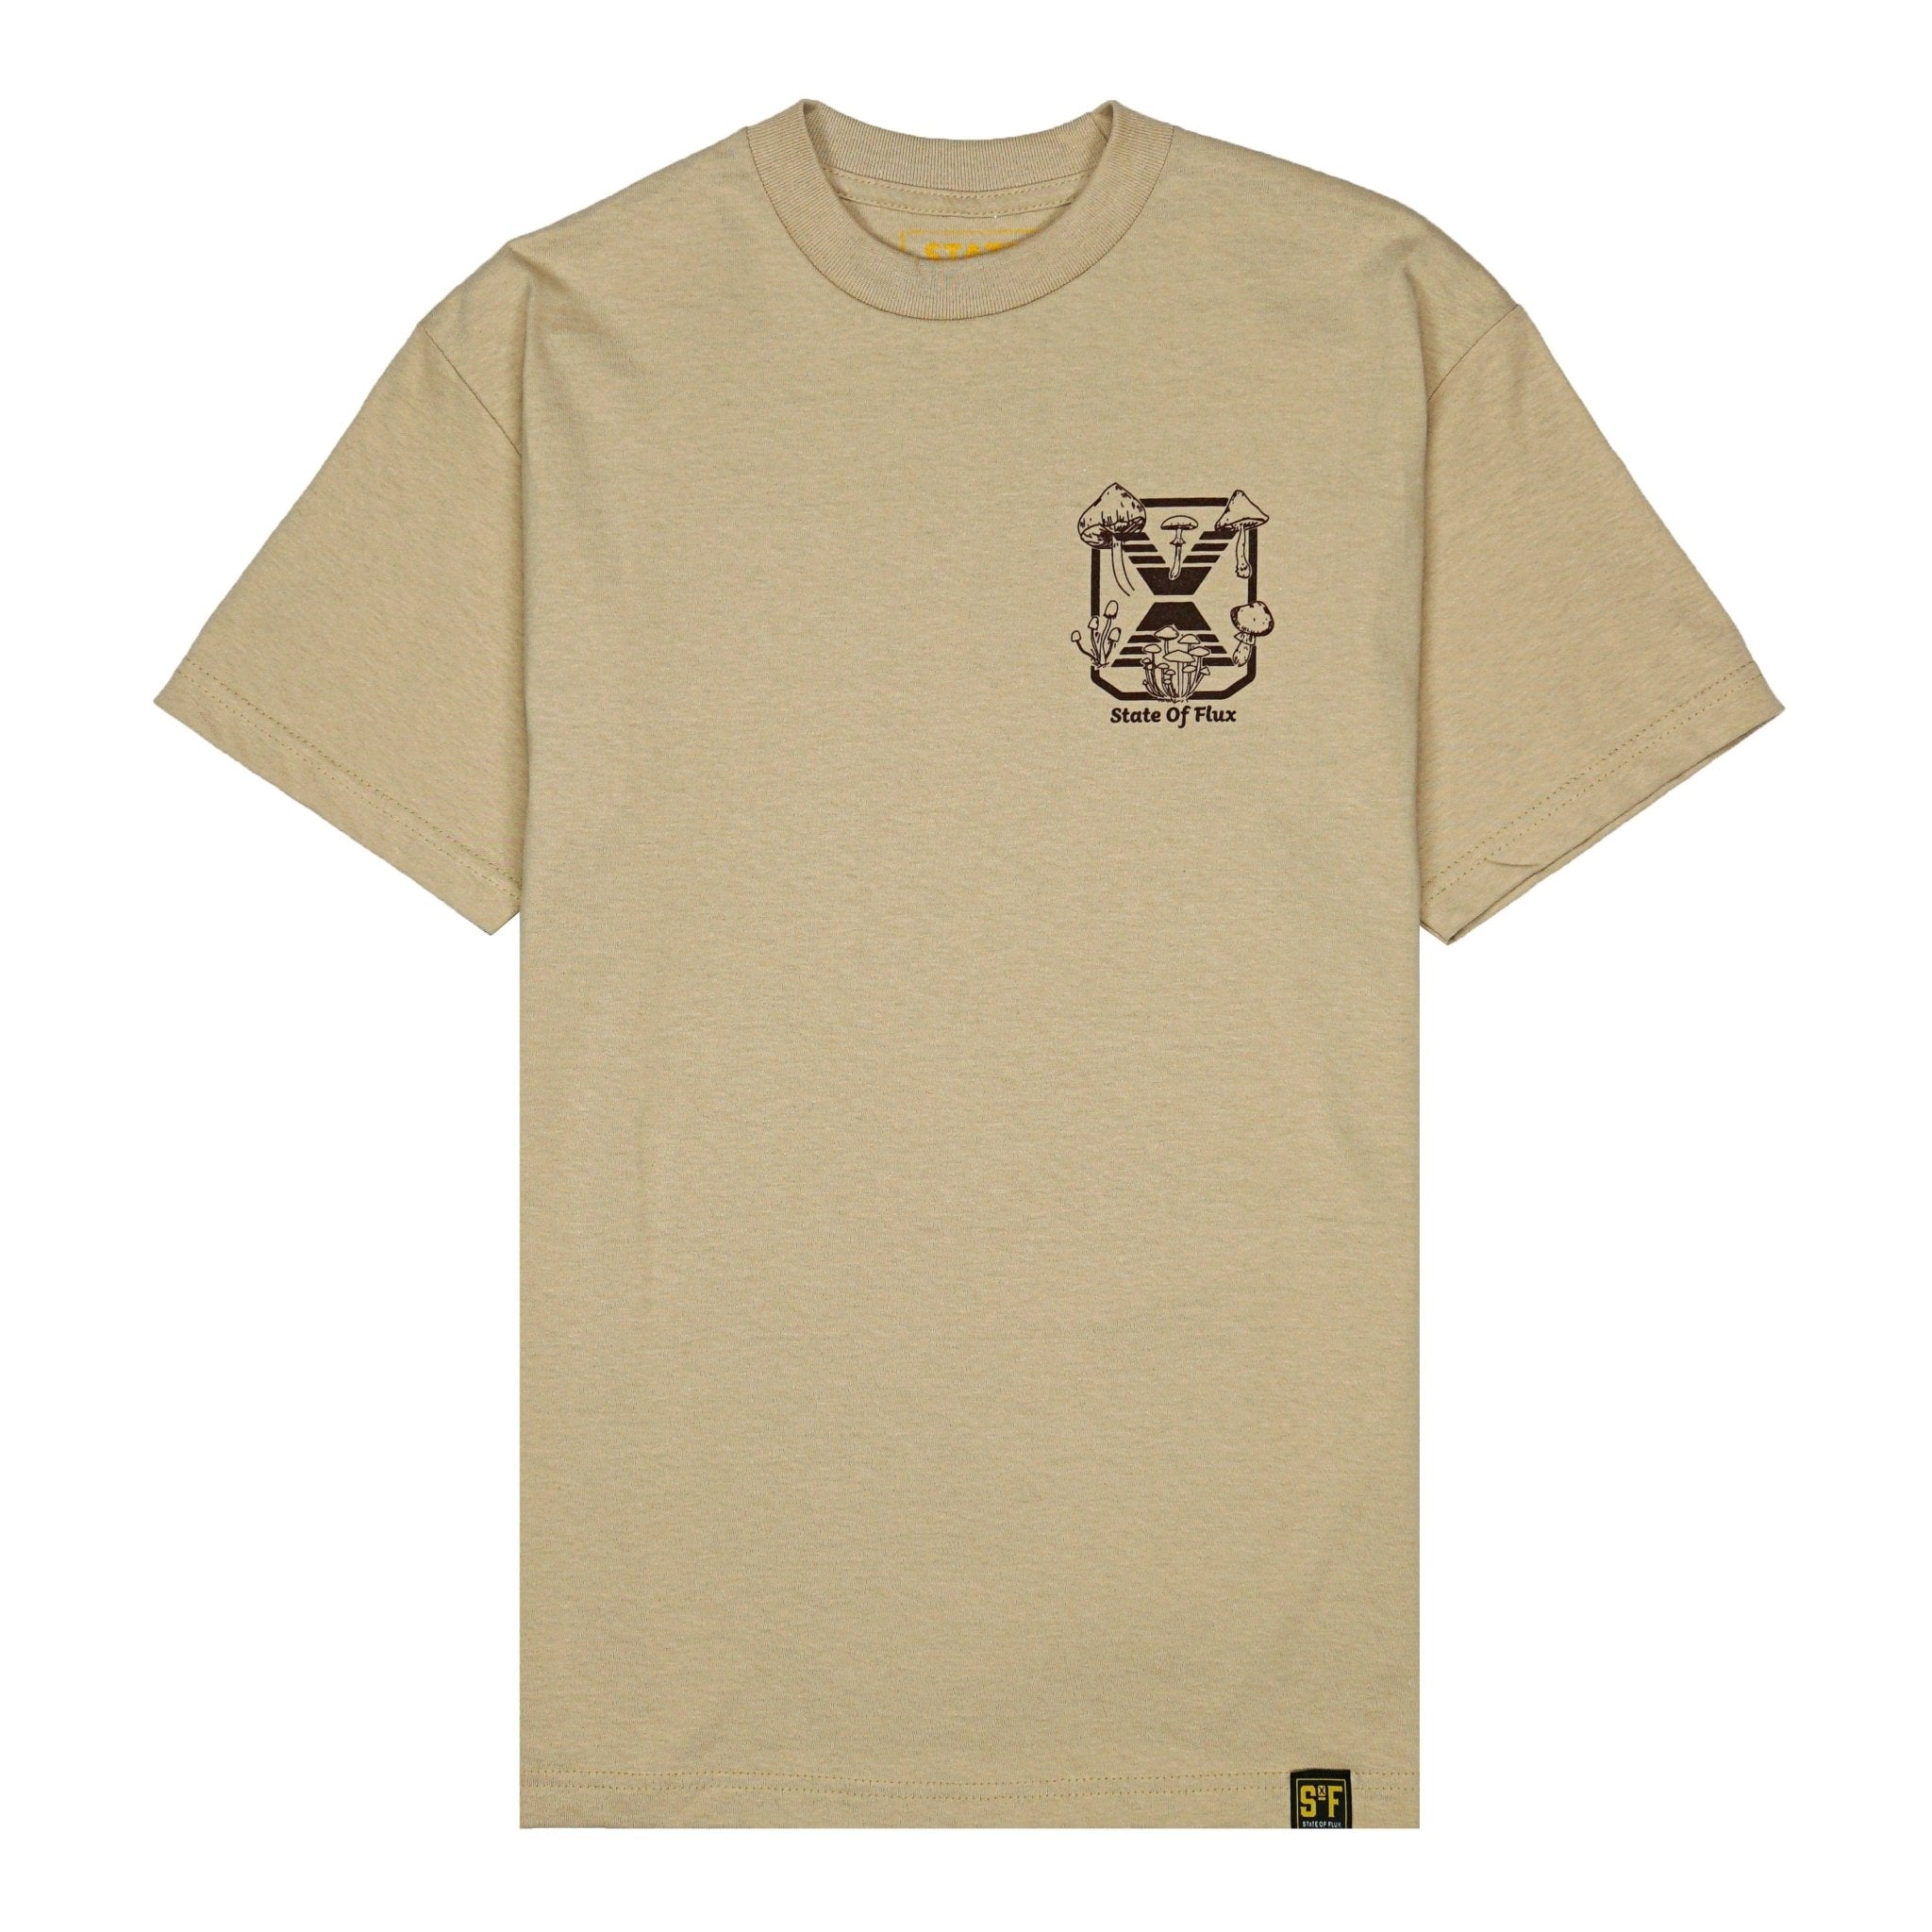 Psychedelic Therapy Tee in khaki